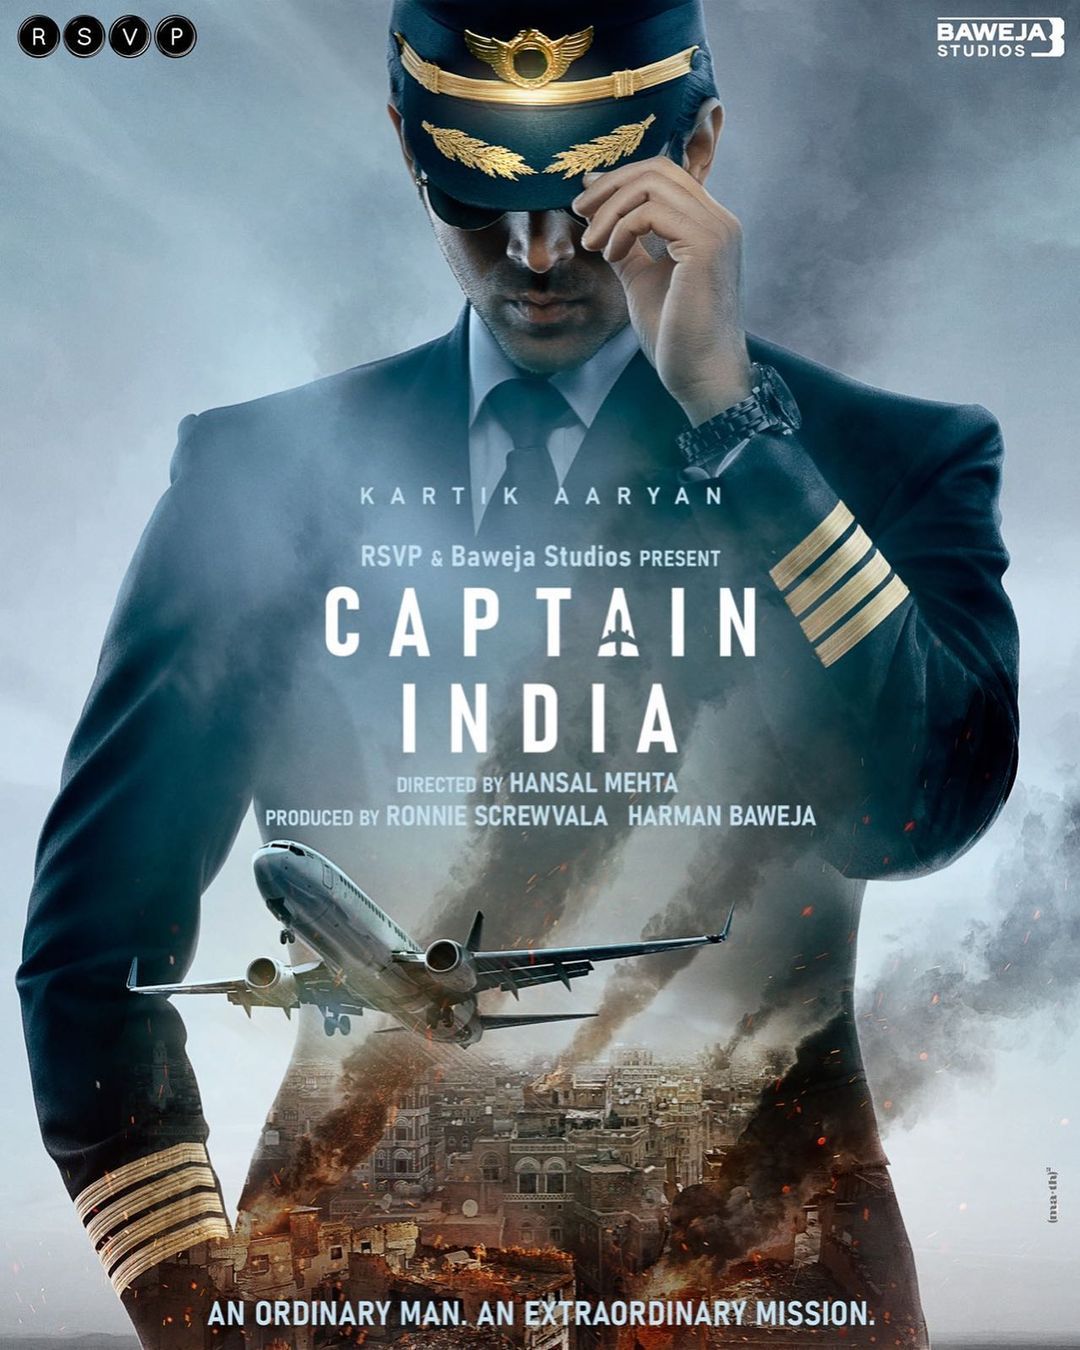 Captain India: Kartik Aaryan will learn how to fly a plane to look authentic as a pilot